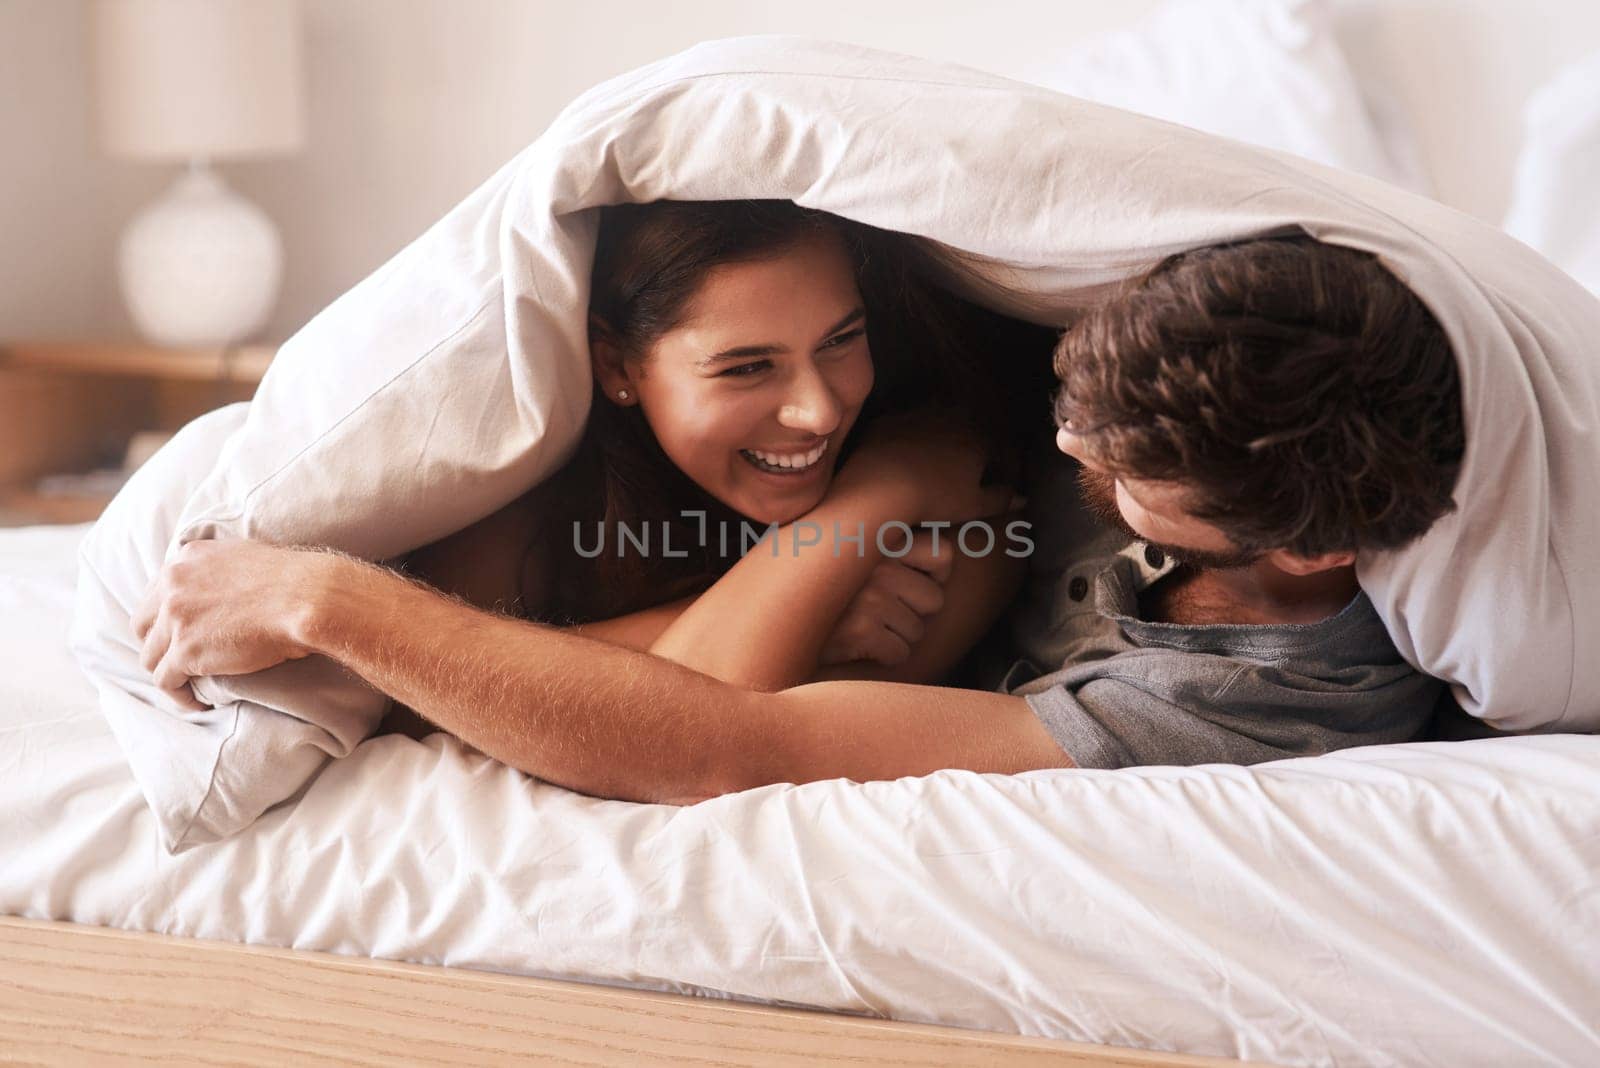 Blanket, smile and couple with love, home and peace with happiness, romance and loving together. Partners, man and woman in the bedroom, peace and romantic with peace, laughing and bonding at home.